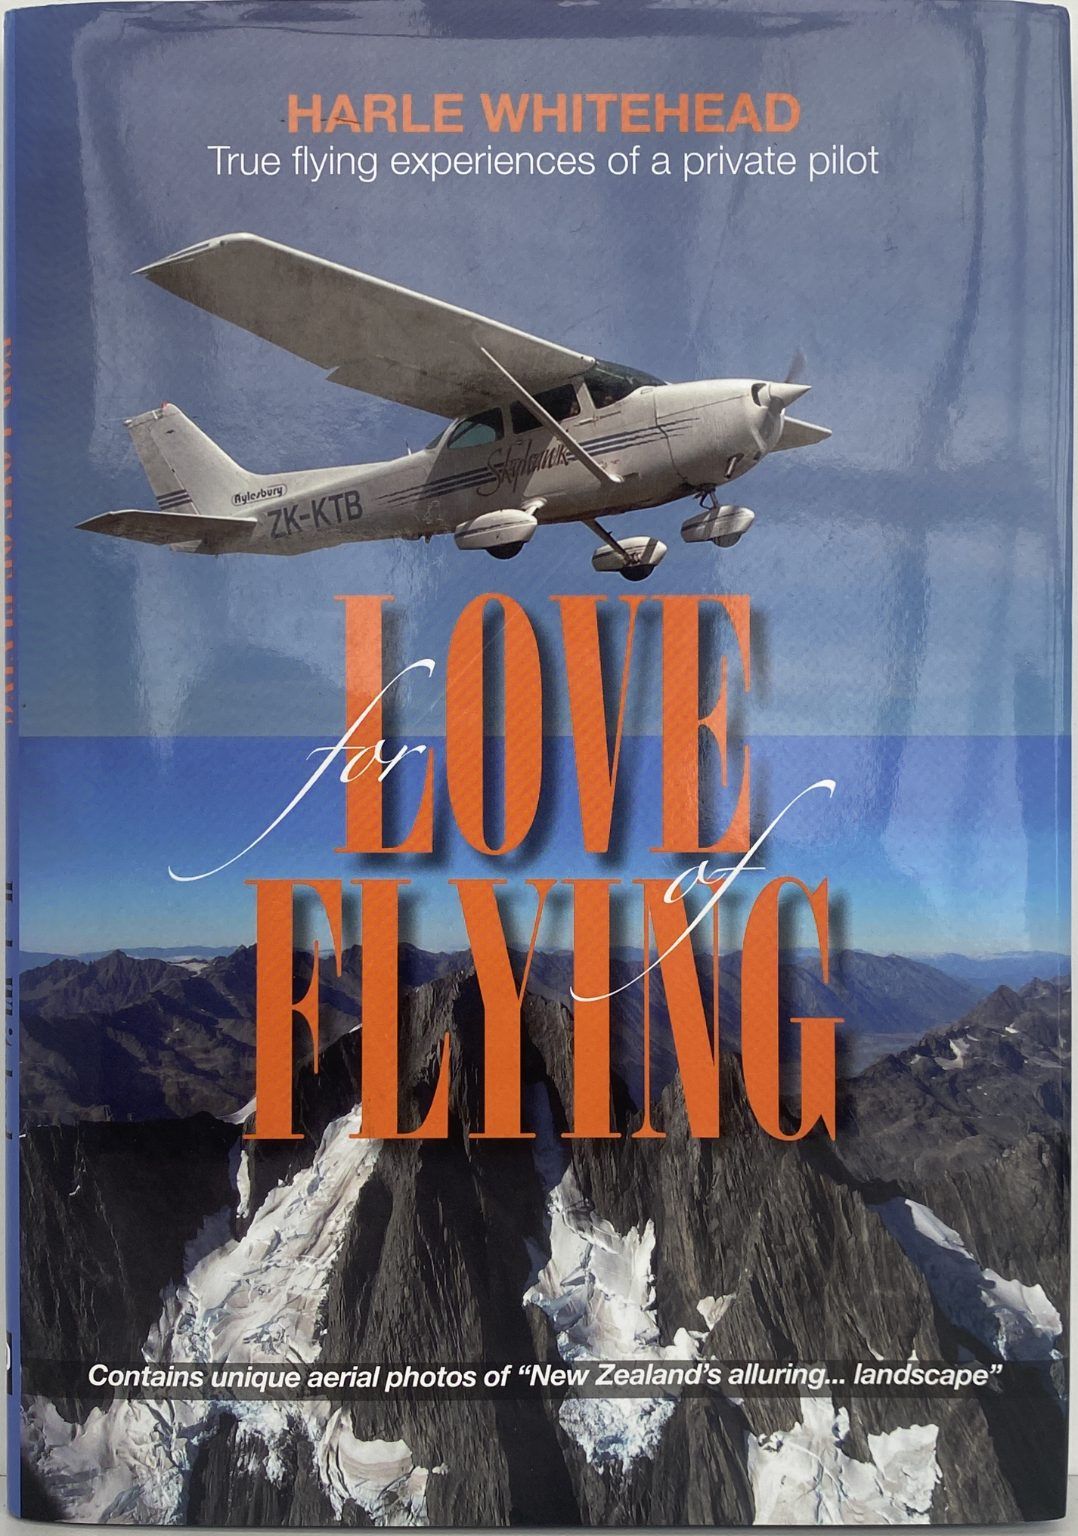 FOR LOVE OF FLYING: True flying experiences of a private pilot